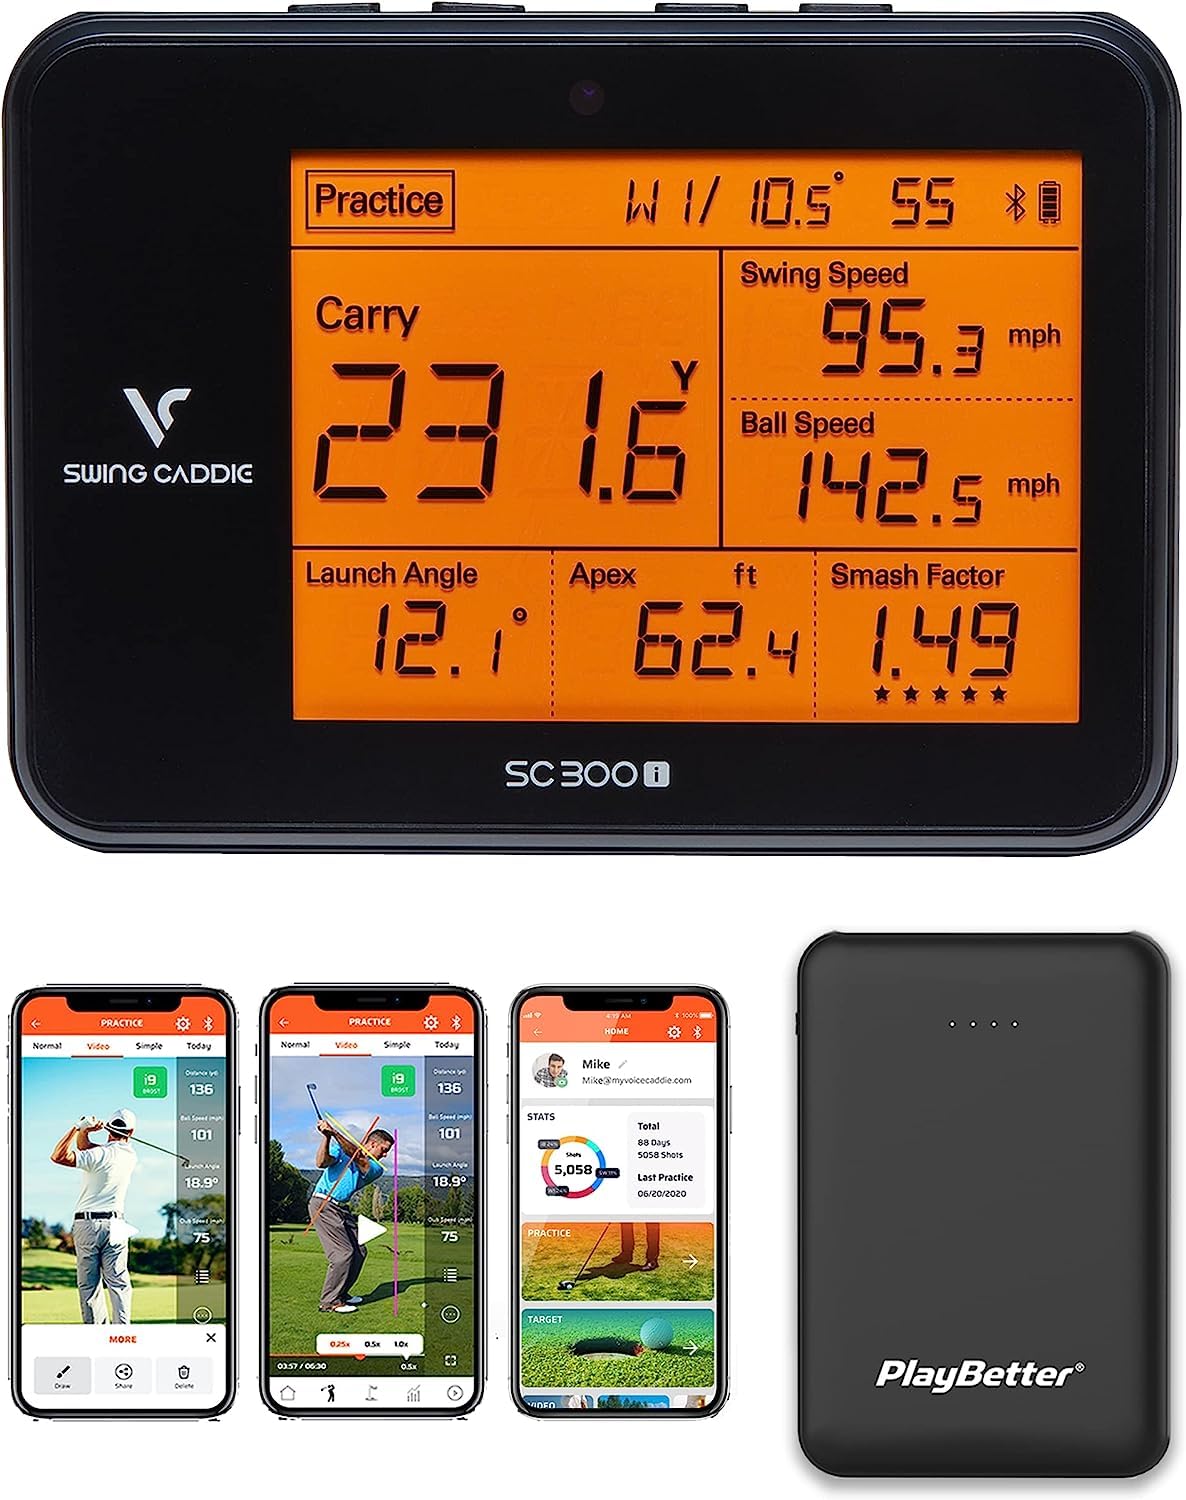 PlayBetter Swing Caddie SC300i Golf Launch Monitor by Voice Caddie | Official Accessories Bundles | Choose from Protective Case, Charger, Gift | Carry/Total Distance, Smash Factor, Ball Speed